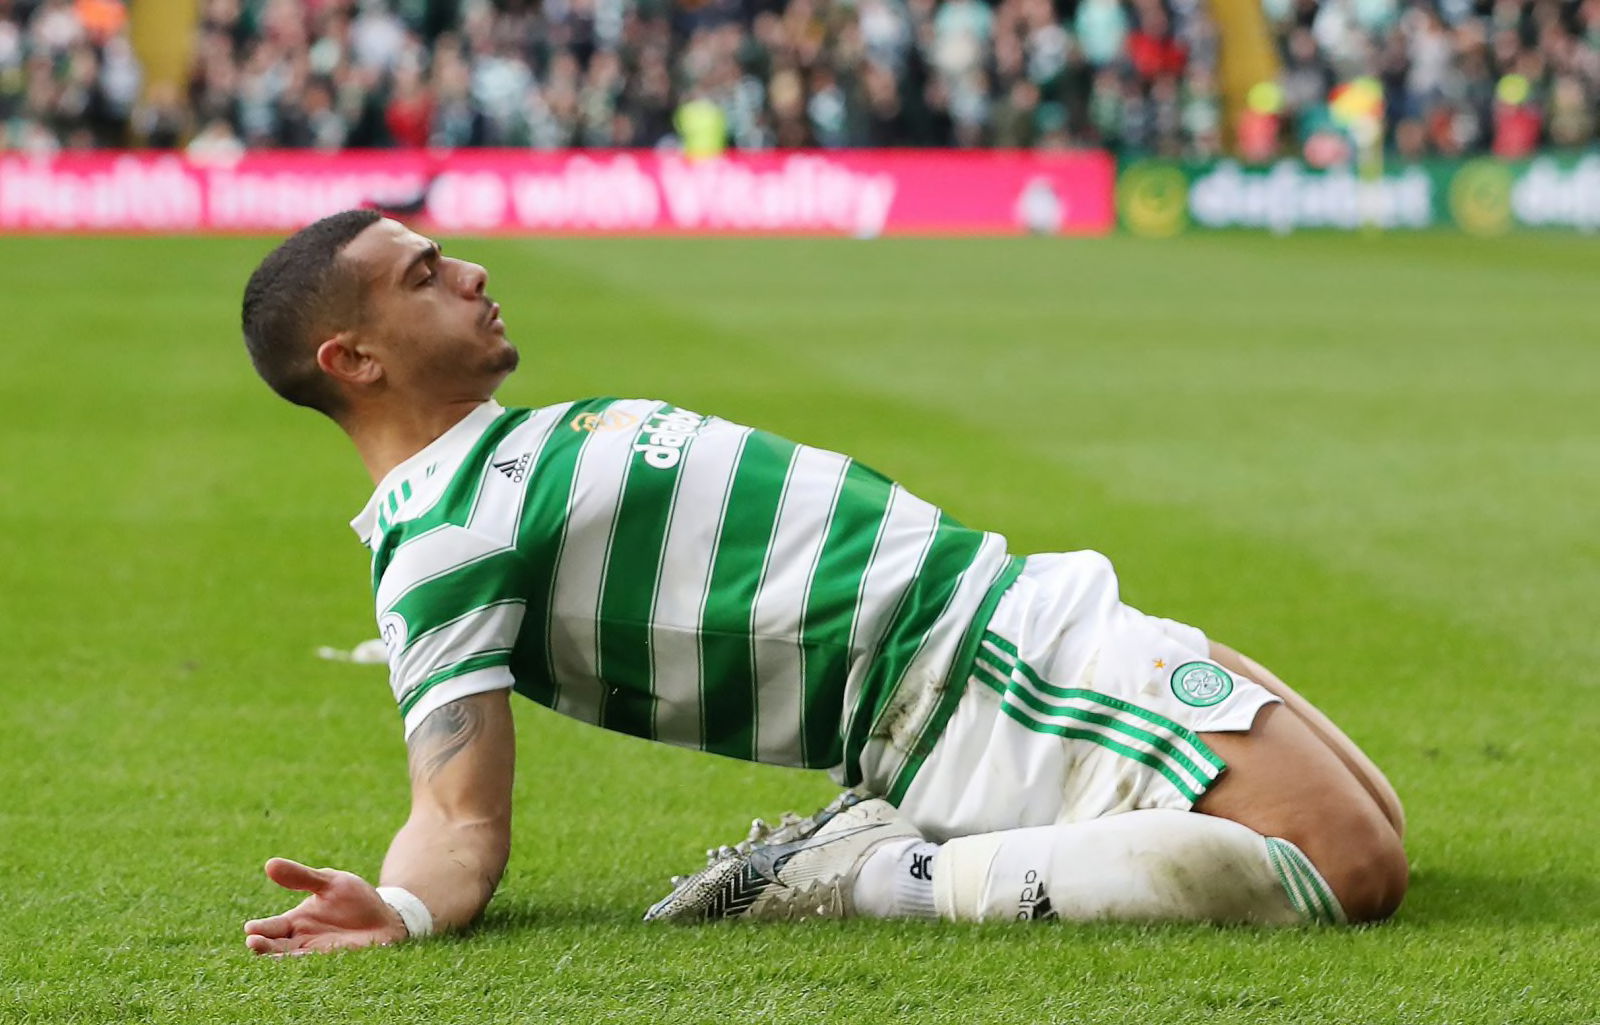 Big Gio, Ralston and more 3 things learned from Celtic vs Dundee